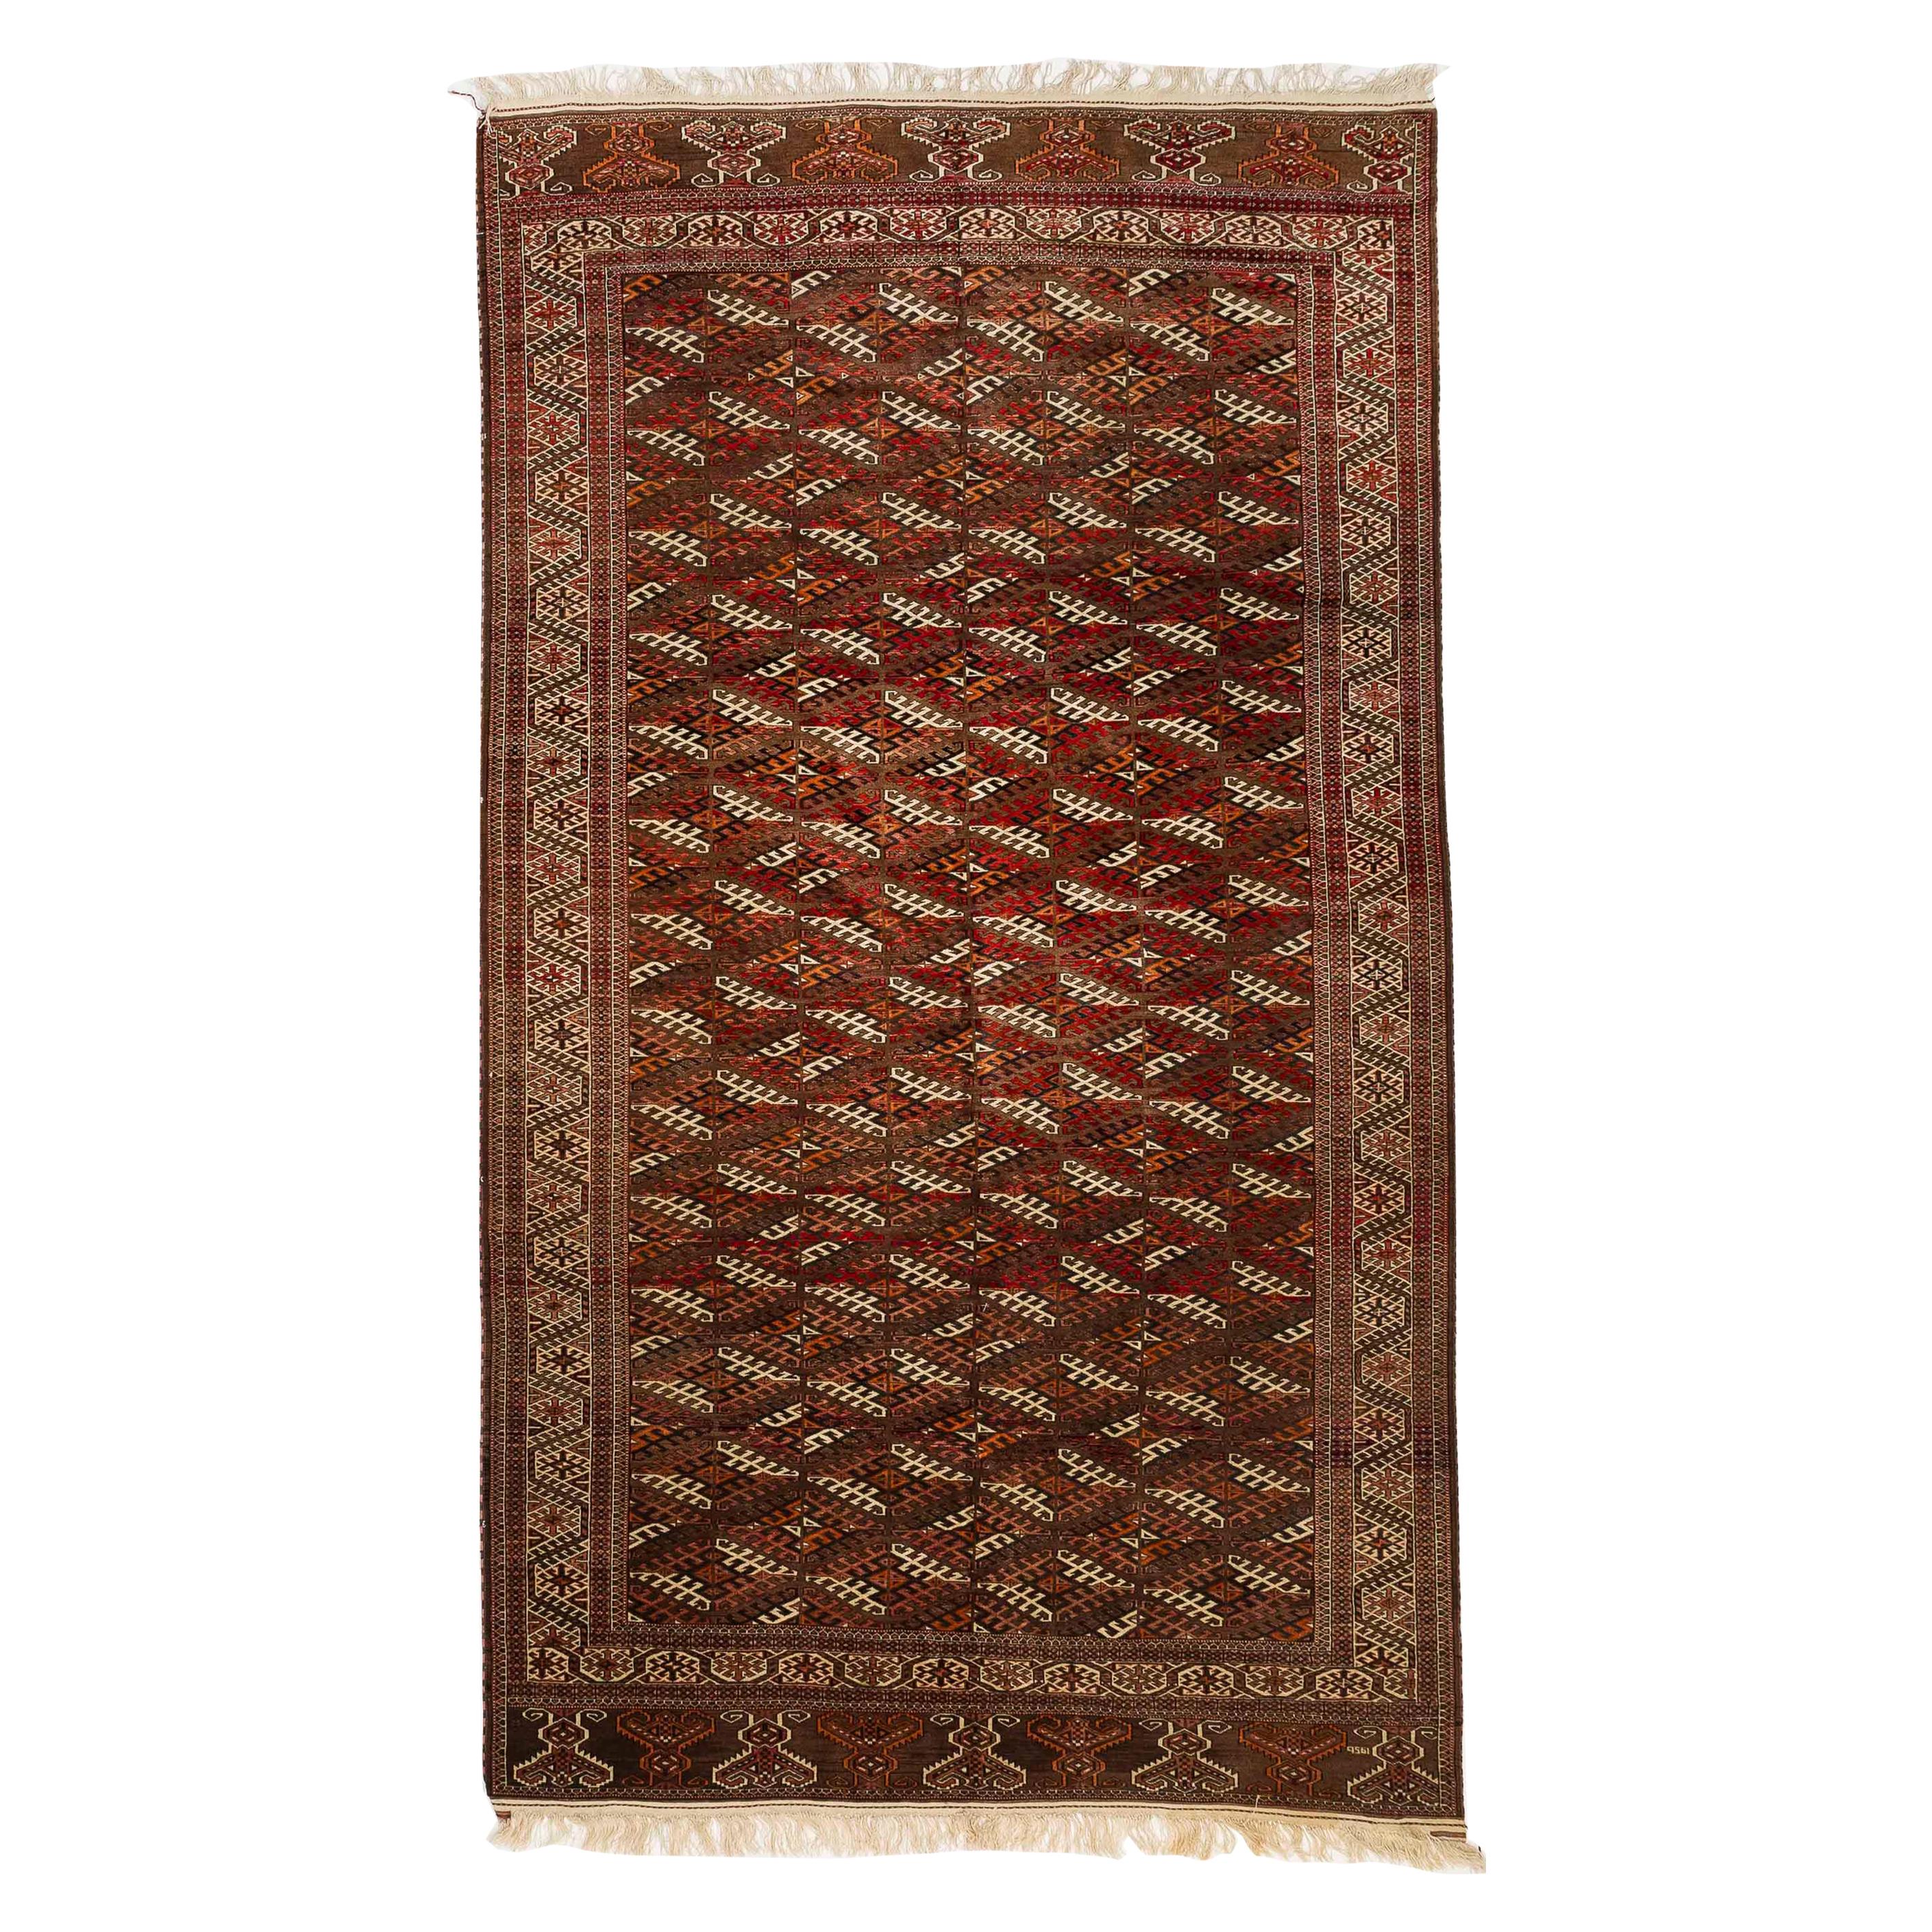 Antique Persian Turkmen Rug with Black and White Diamond Patterns on Red Field